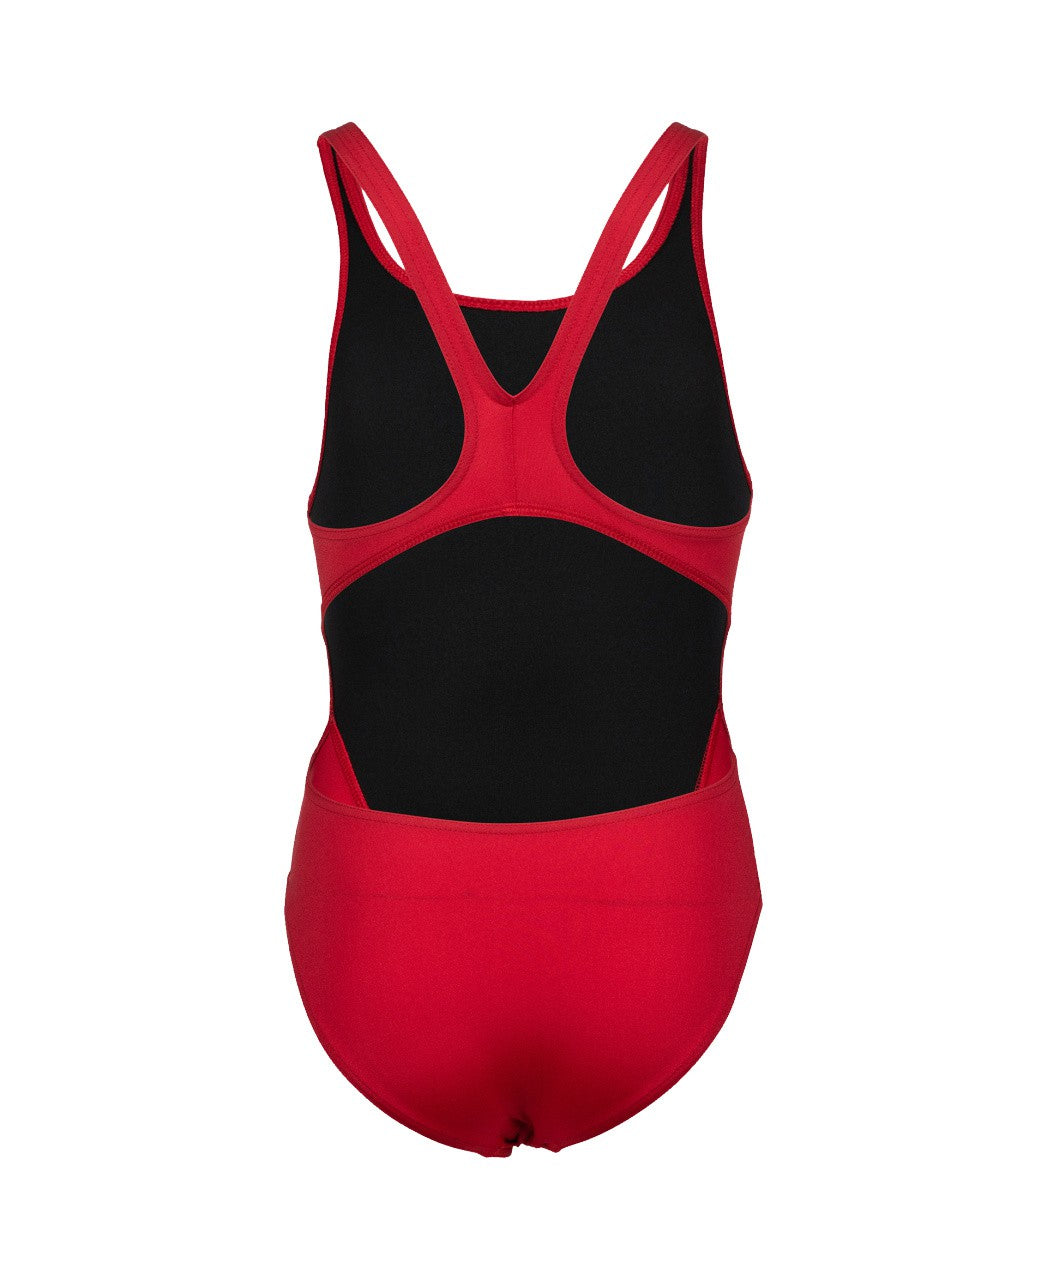 G Team Swimsuit Swim Tech Solid red-white